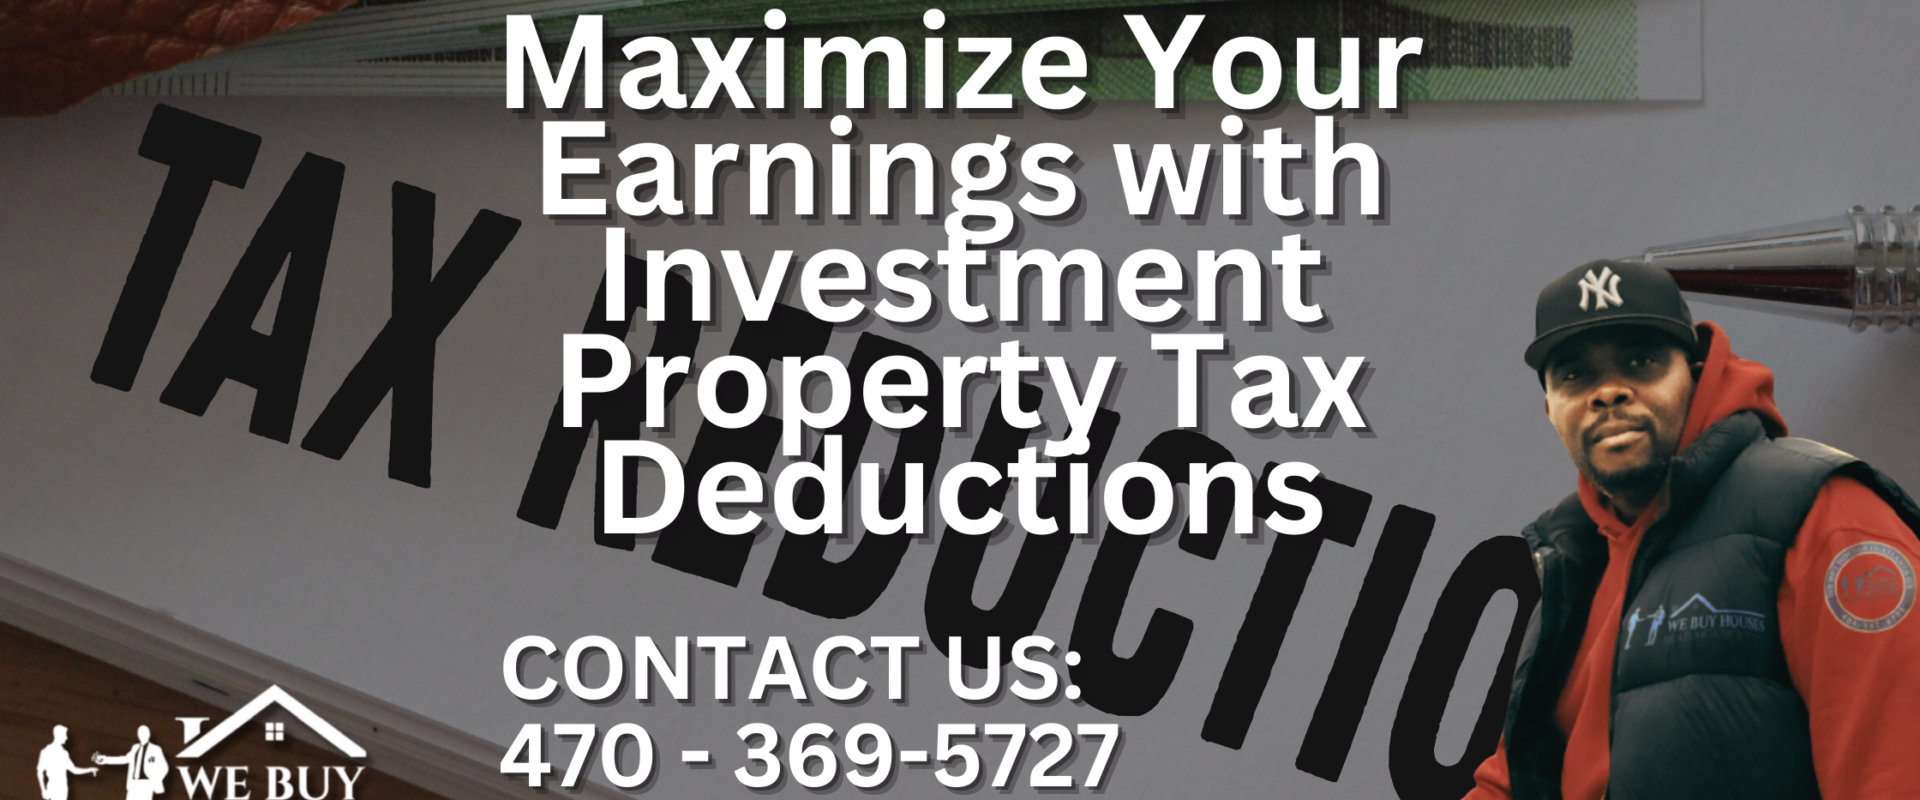 Maximize Your Earnings with Investment Property Tax Deductions